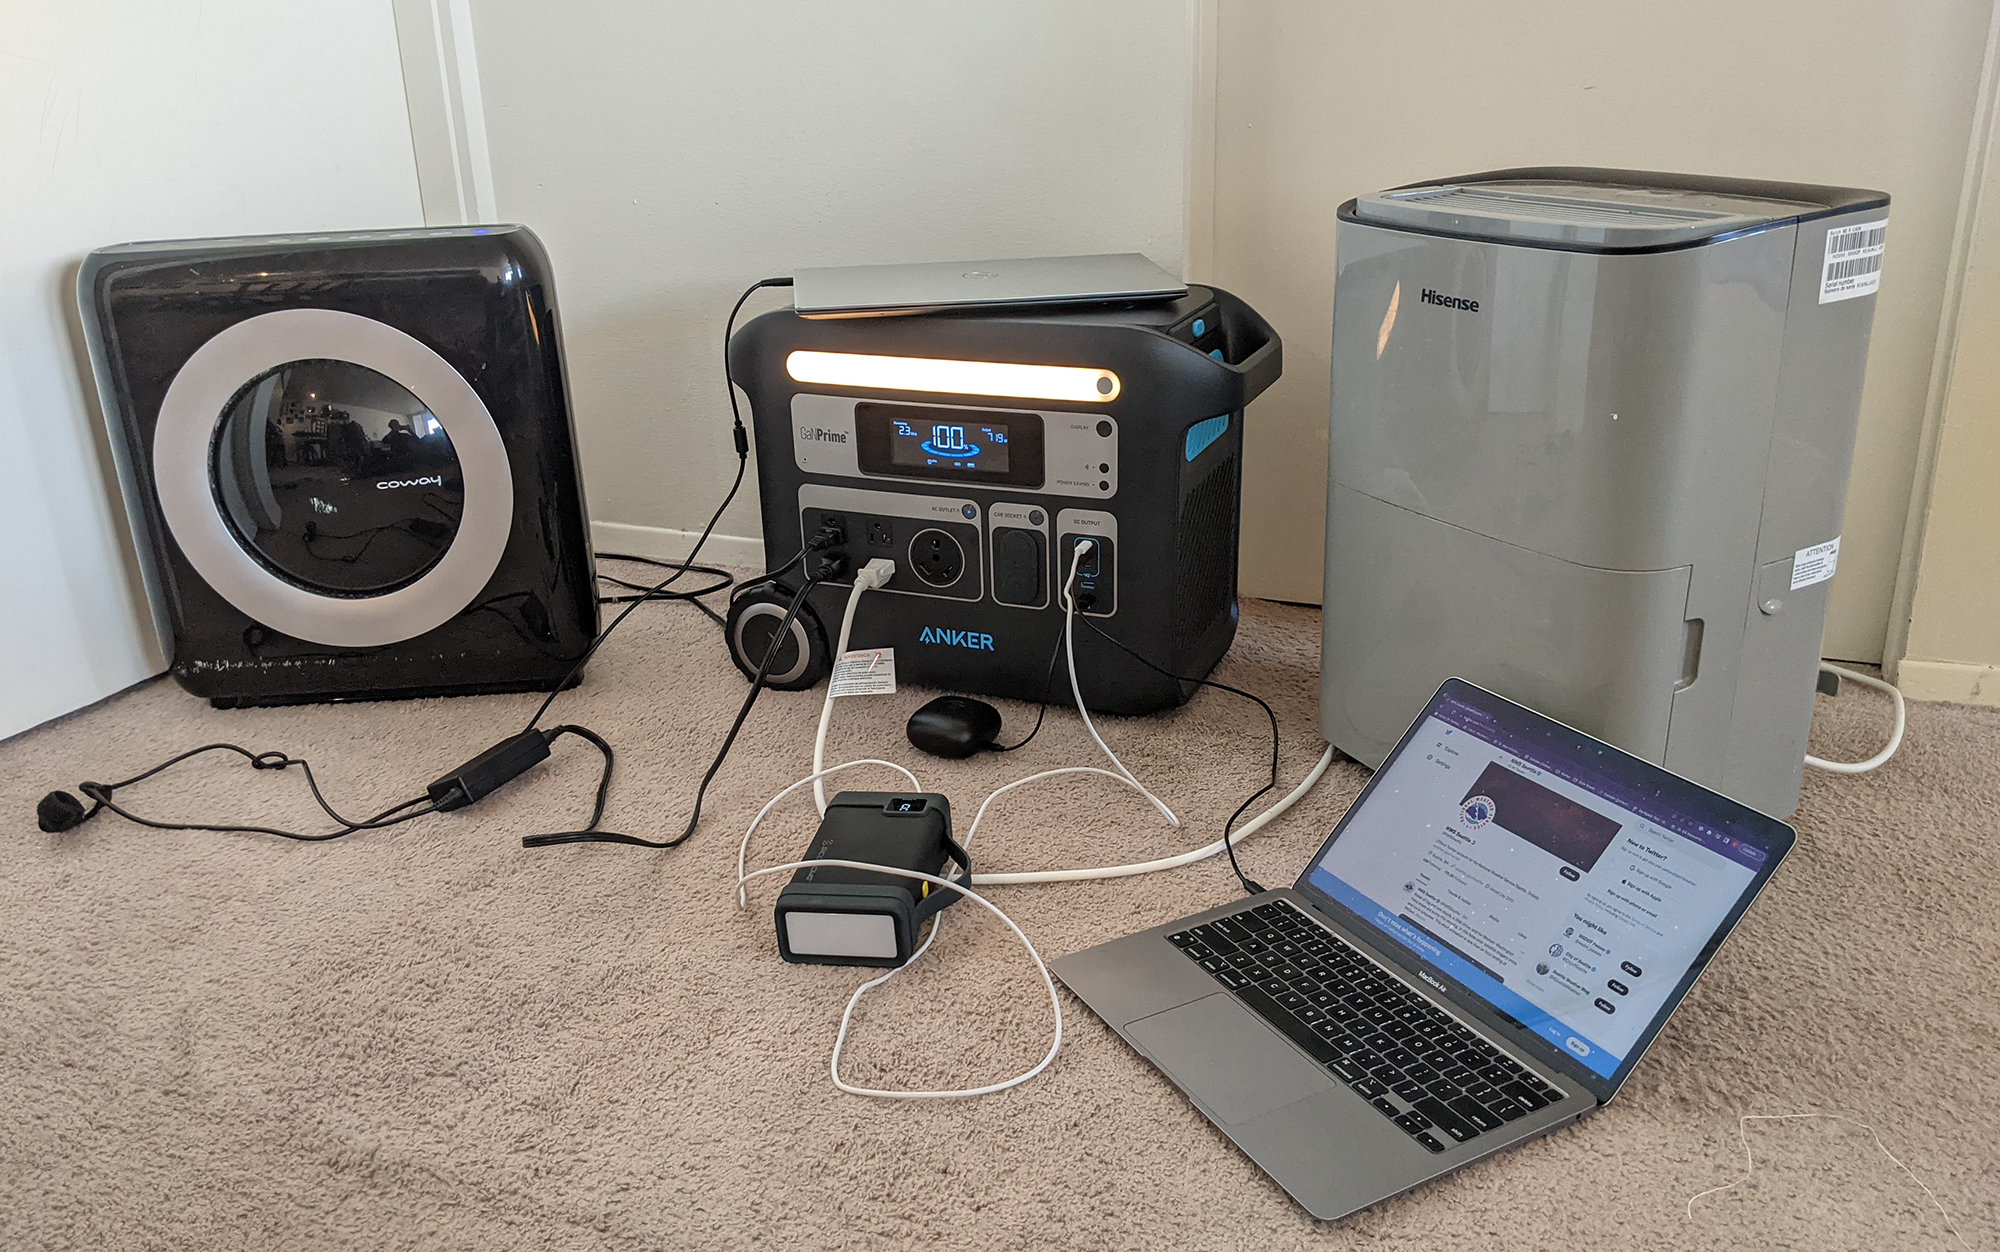 Trying to make a dent in the Anker 767Ã¢ÂÂs output capacity with a dehumidifier, air purifier, two laptops, a battery pack, a pair of headphones, and turning the light on the station up and down using the Anker app. 